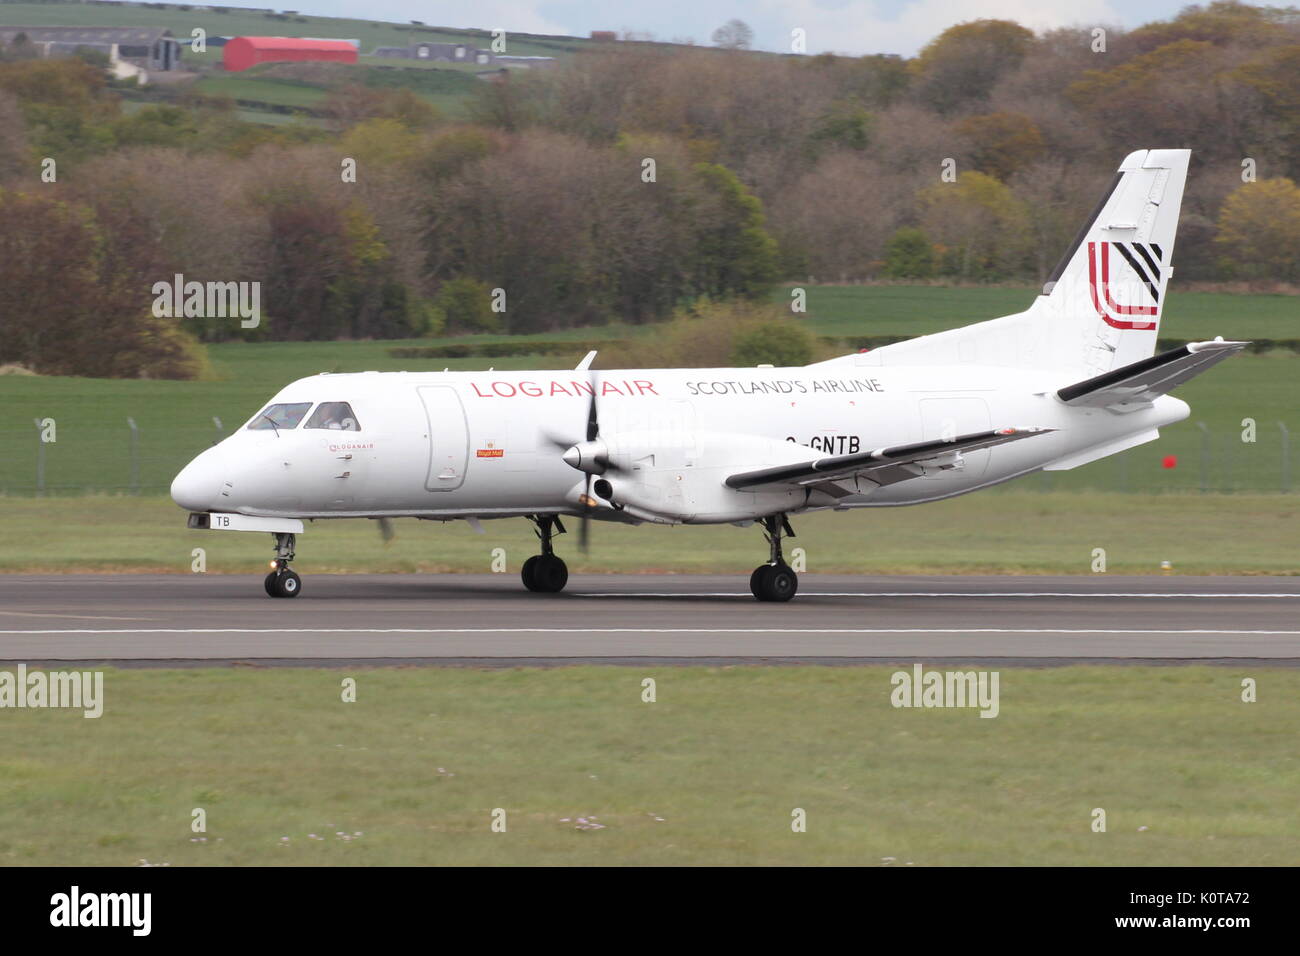 G-GNTB, a Saab 340 operated by Loganair, during training at Glasgow Prestwick International Airport in Ayrshire. Stock Photo